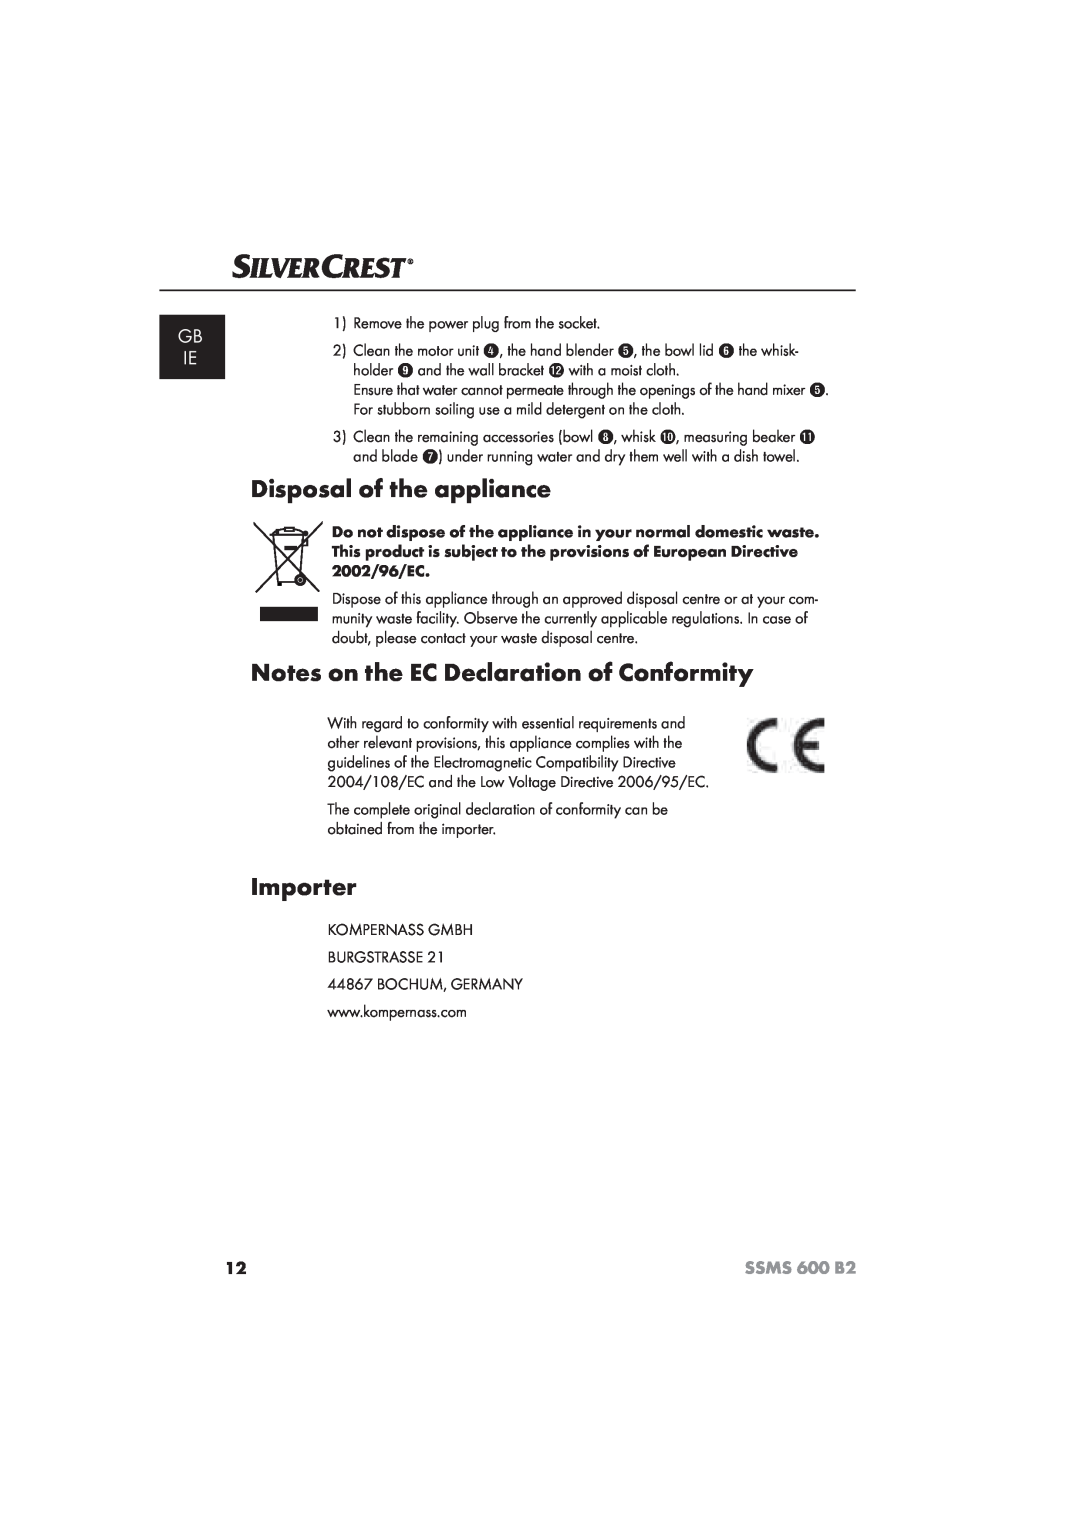 Silvercrest 600 B26 Disposal of the appliance, Notes on the EC Declaration of Conformity, Importer, Gb Ie, SSMS 600 B2 